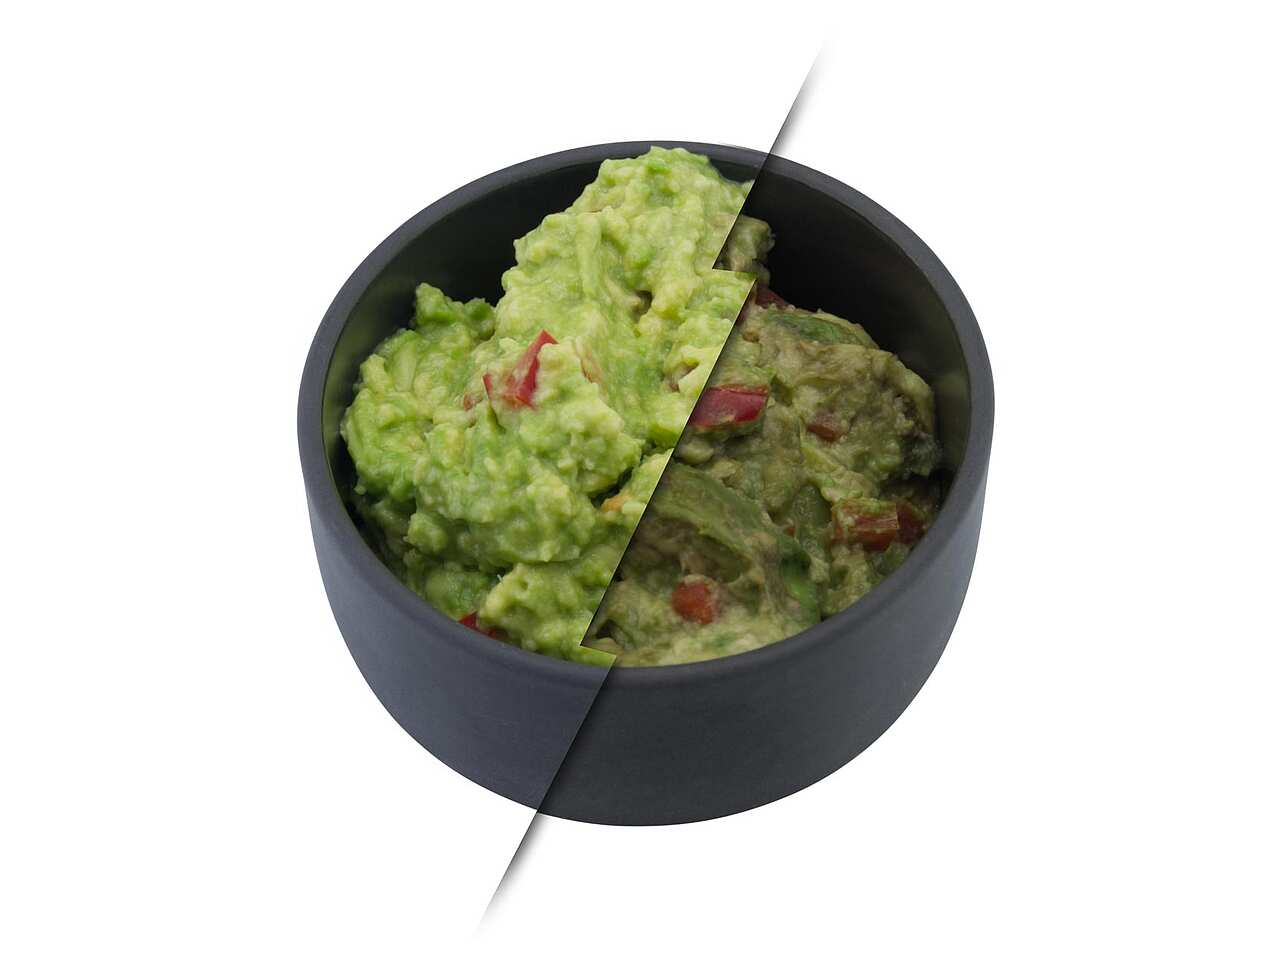 Guacamole treated with Food freshly vs. untreated